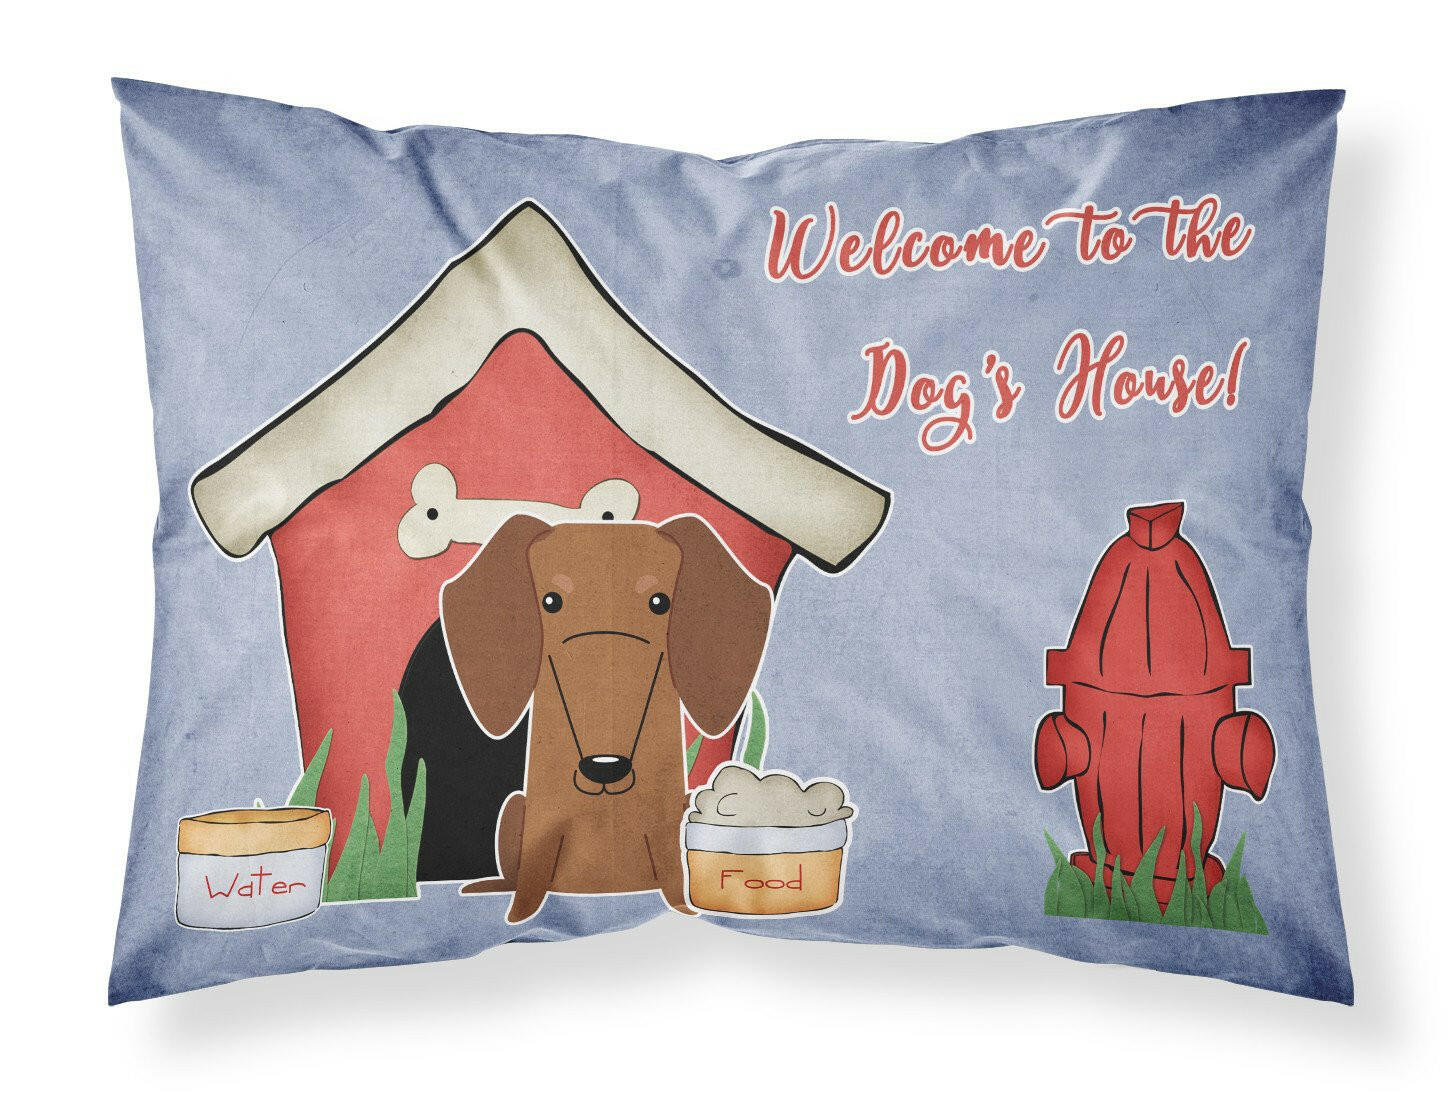 Dog House Collection Dachshund Red Brown Fabric Standard Pillowcase BB2884PILLOWCASE by Caroline's Treasures